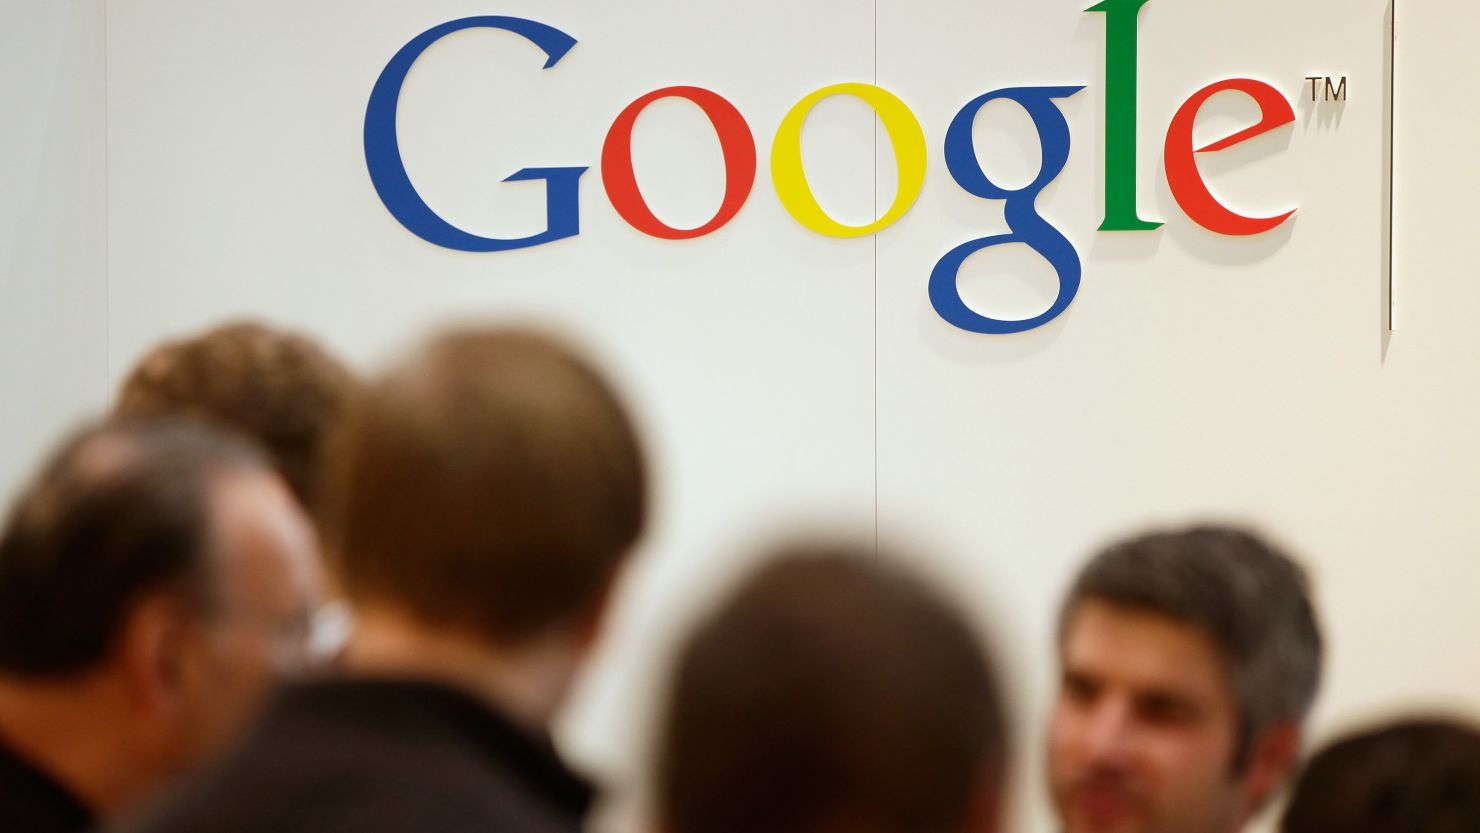 Google says its new privacy policy is meant to be clearer to users and doesn't change privacy controls.